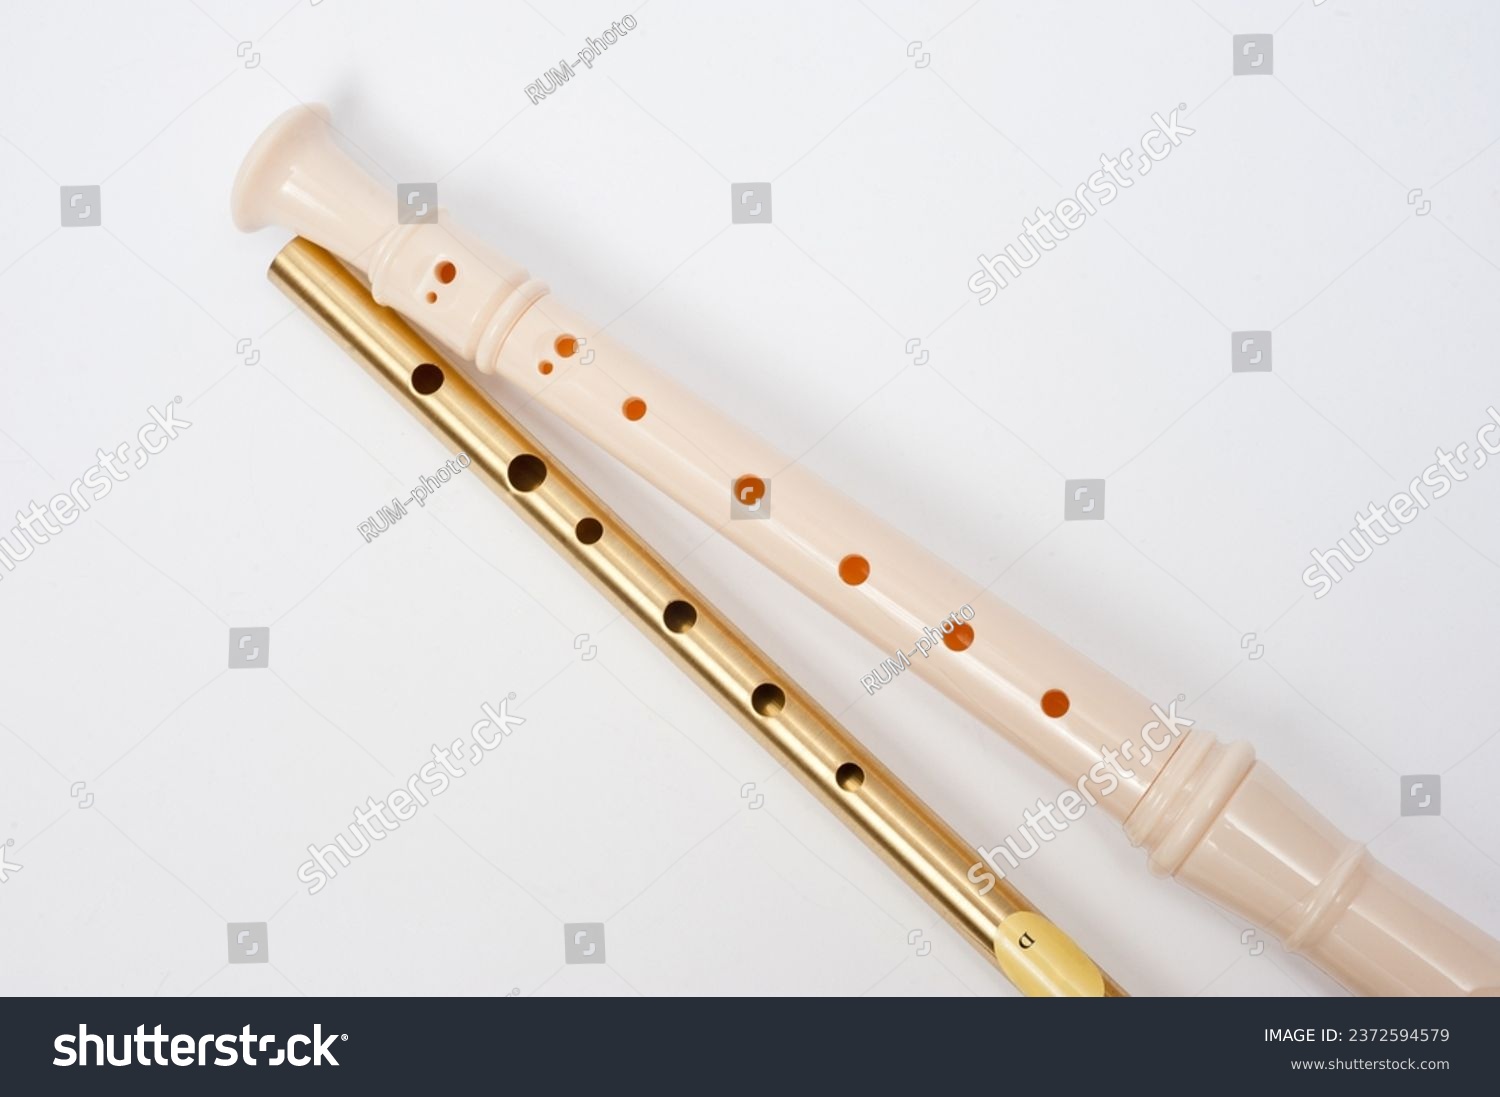 Irish whistle and block flute are longitudinal flutes with a whistle device and playing holes. #2372594579